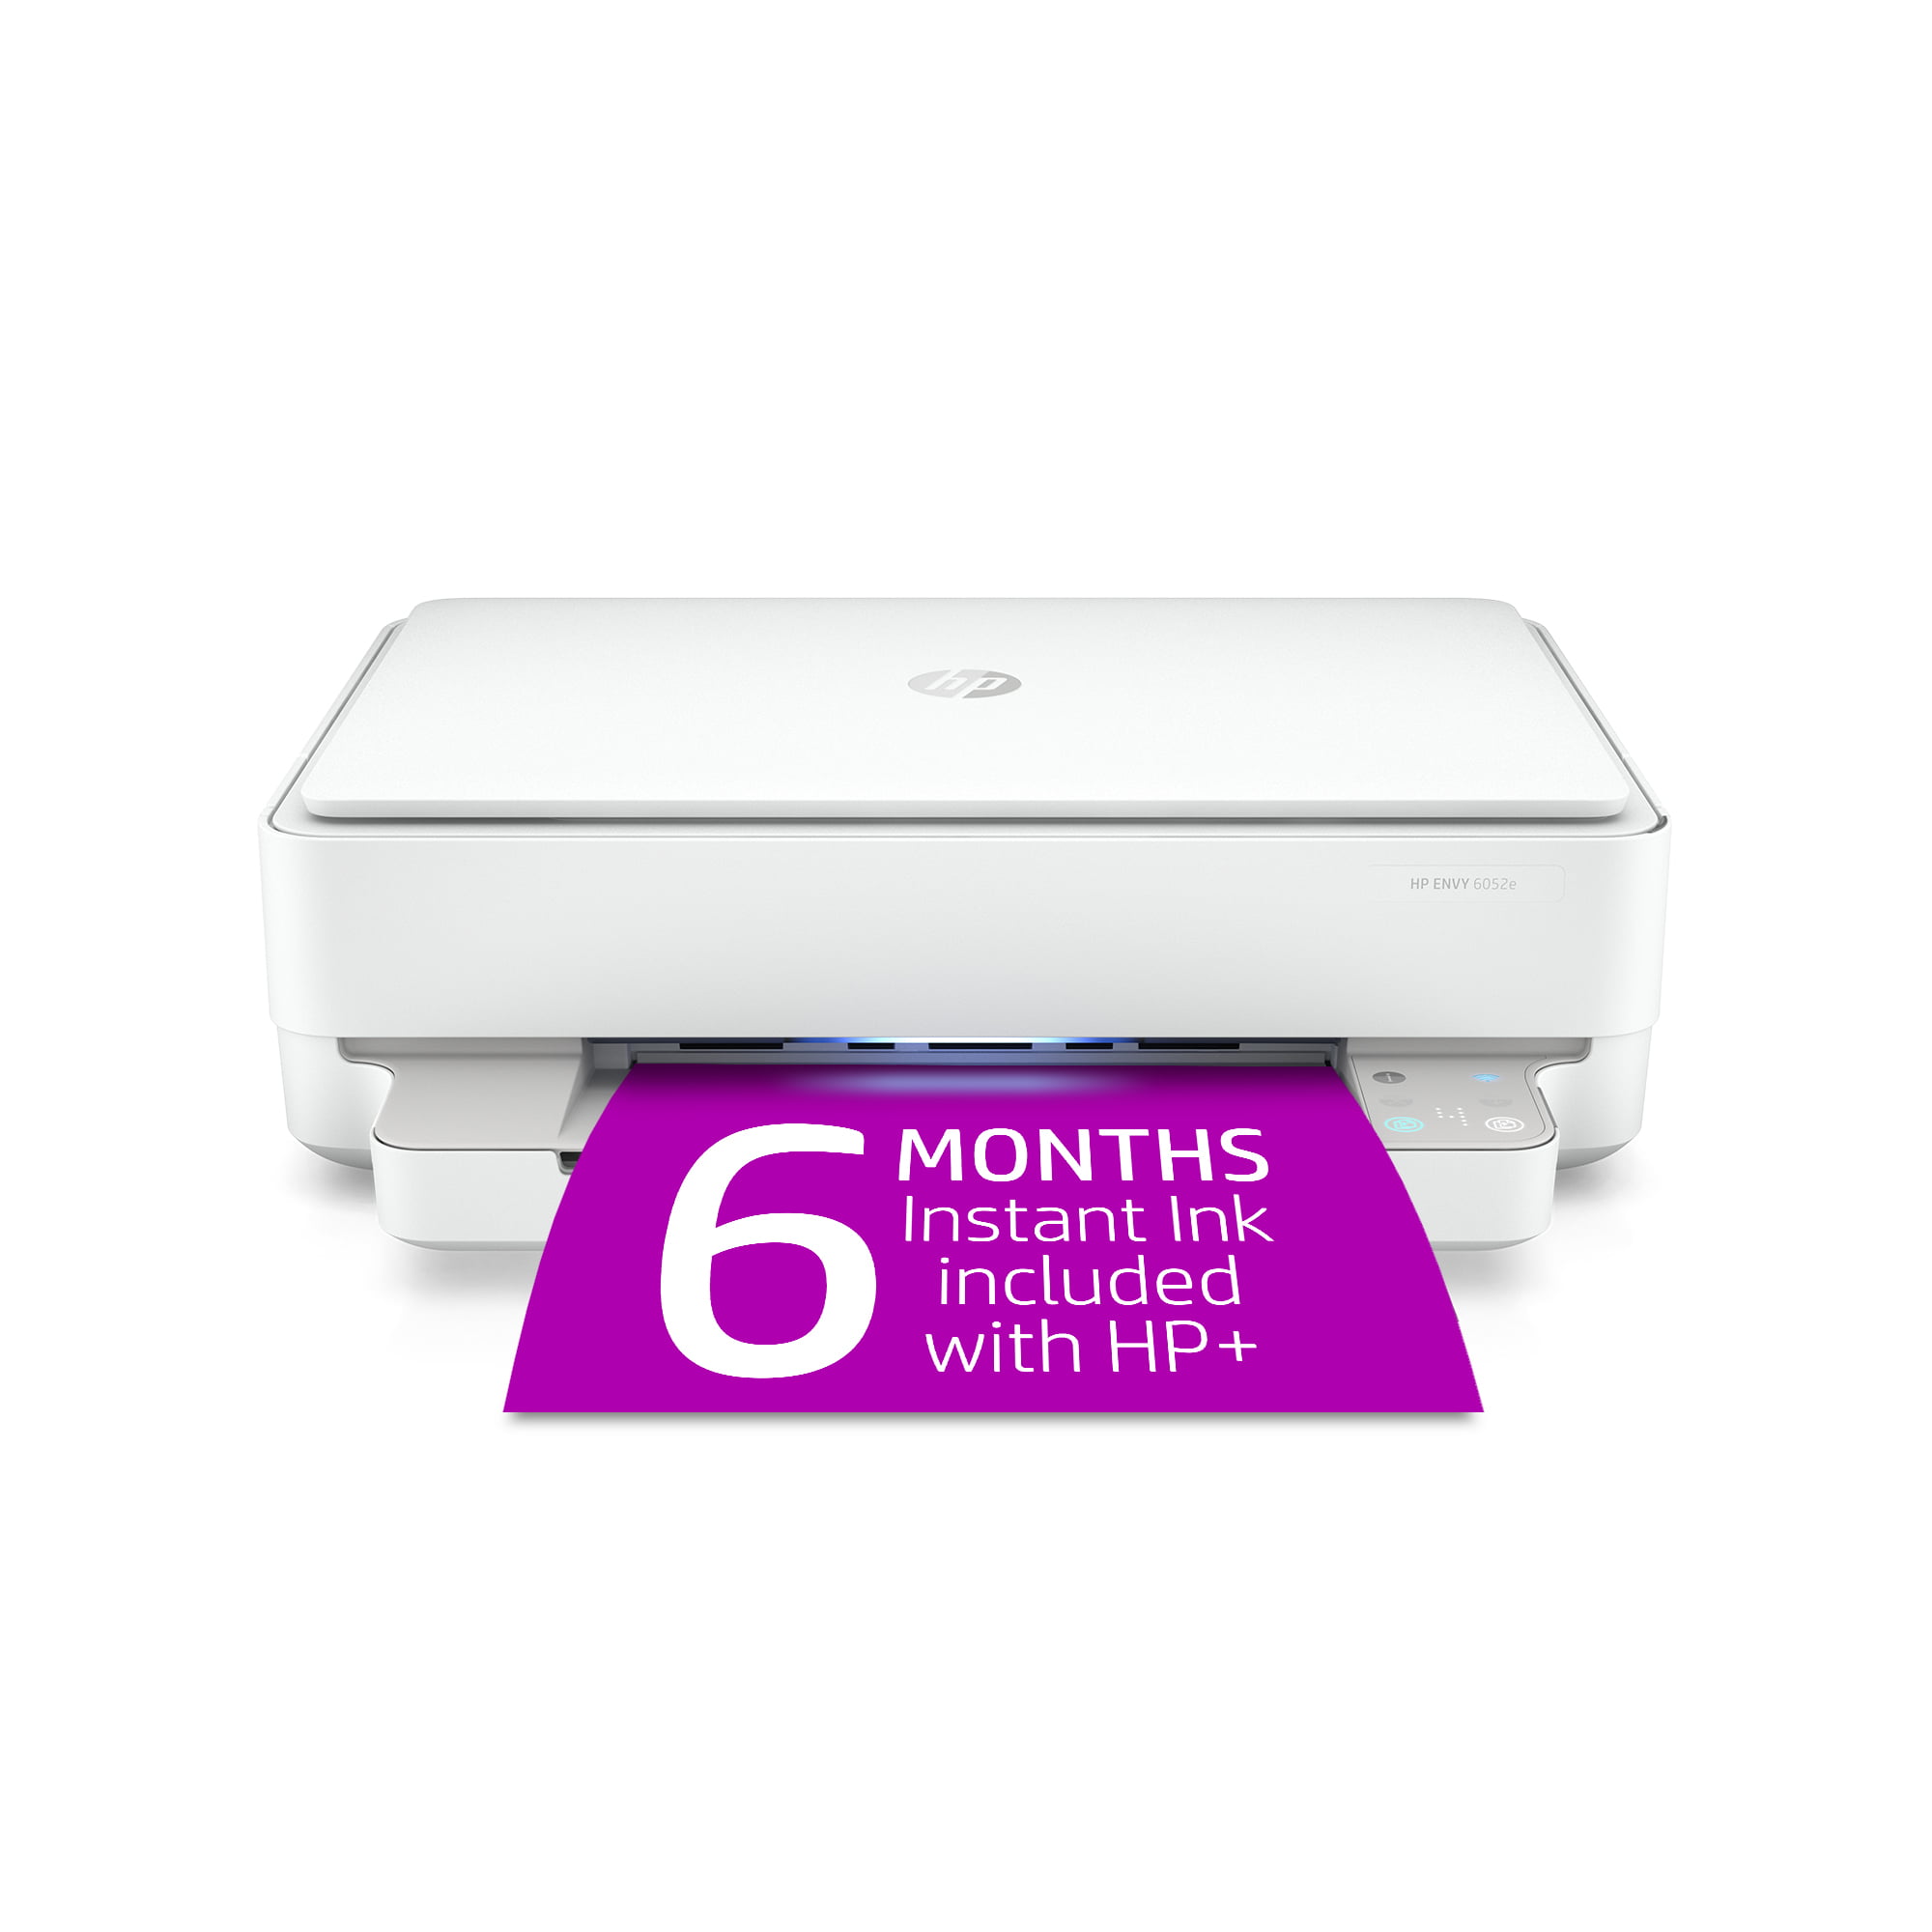 gesponsord Openbaren sigaret HP ENVY 6052e All-in-One Wireless Color Inkjet Printer with 6 Months  Instant Ink Included with HP+ - Walmart.com